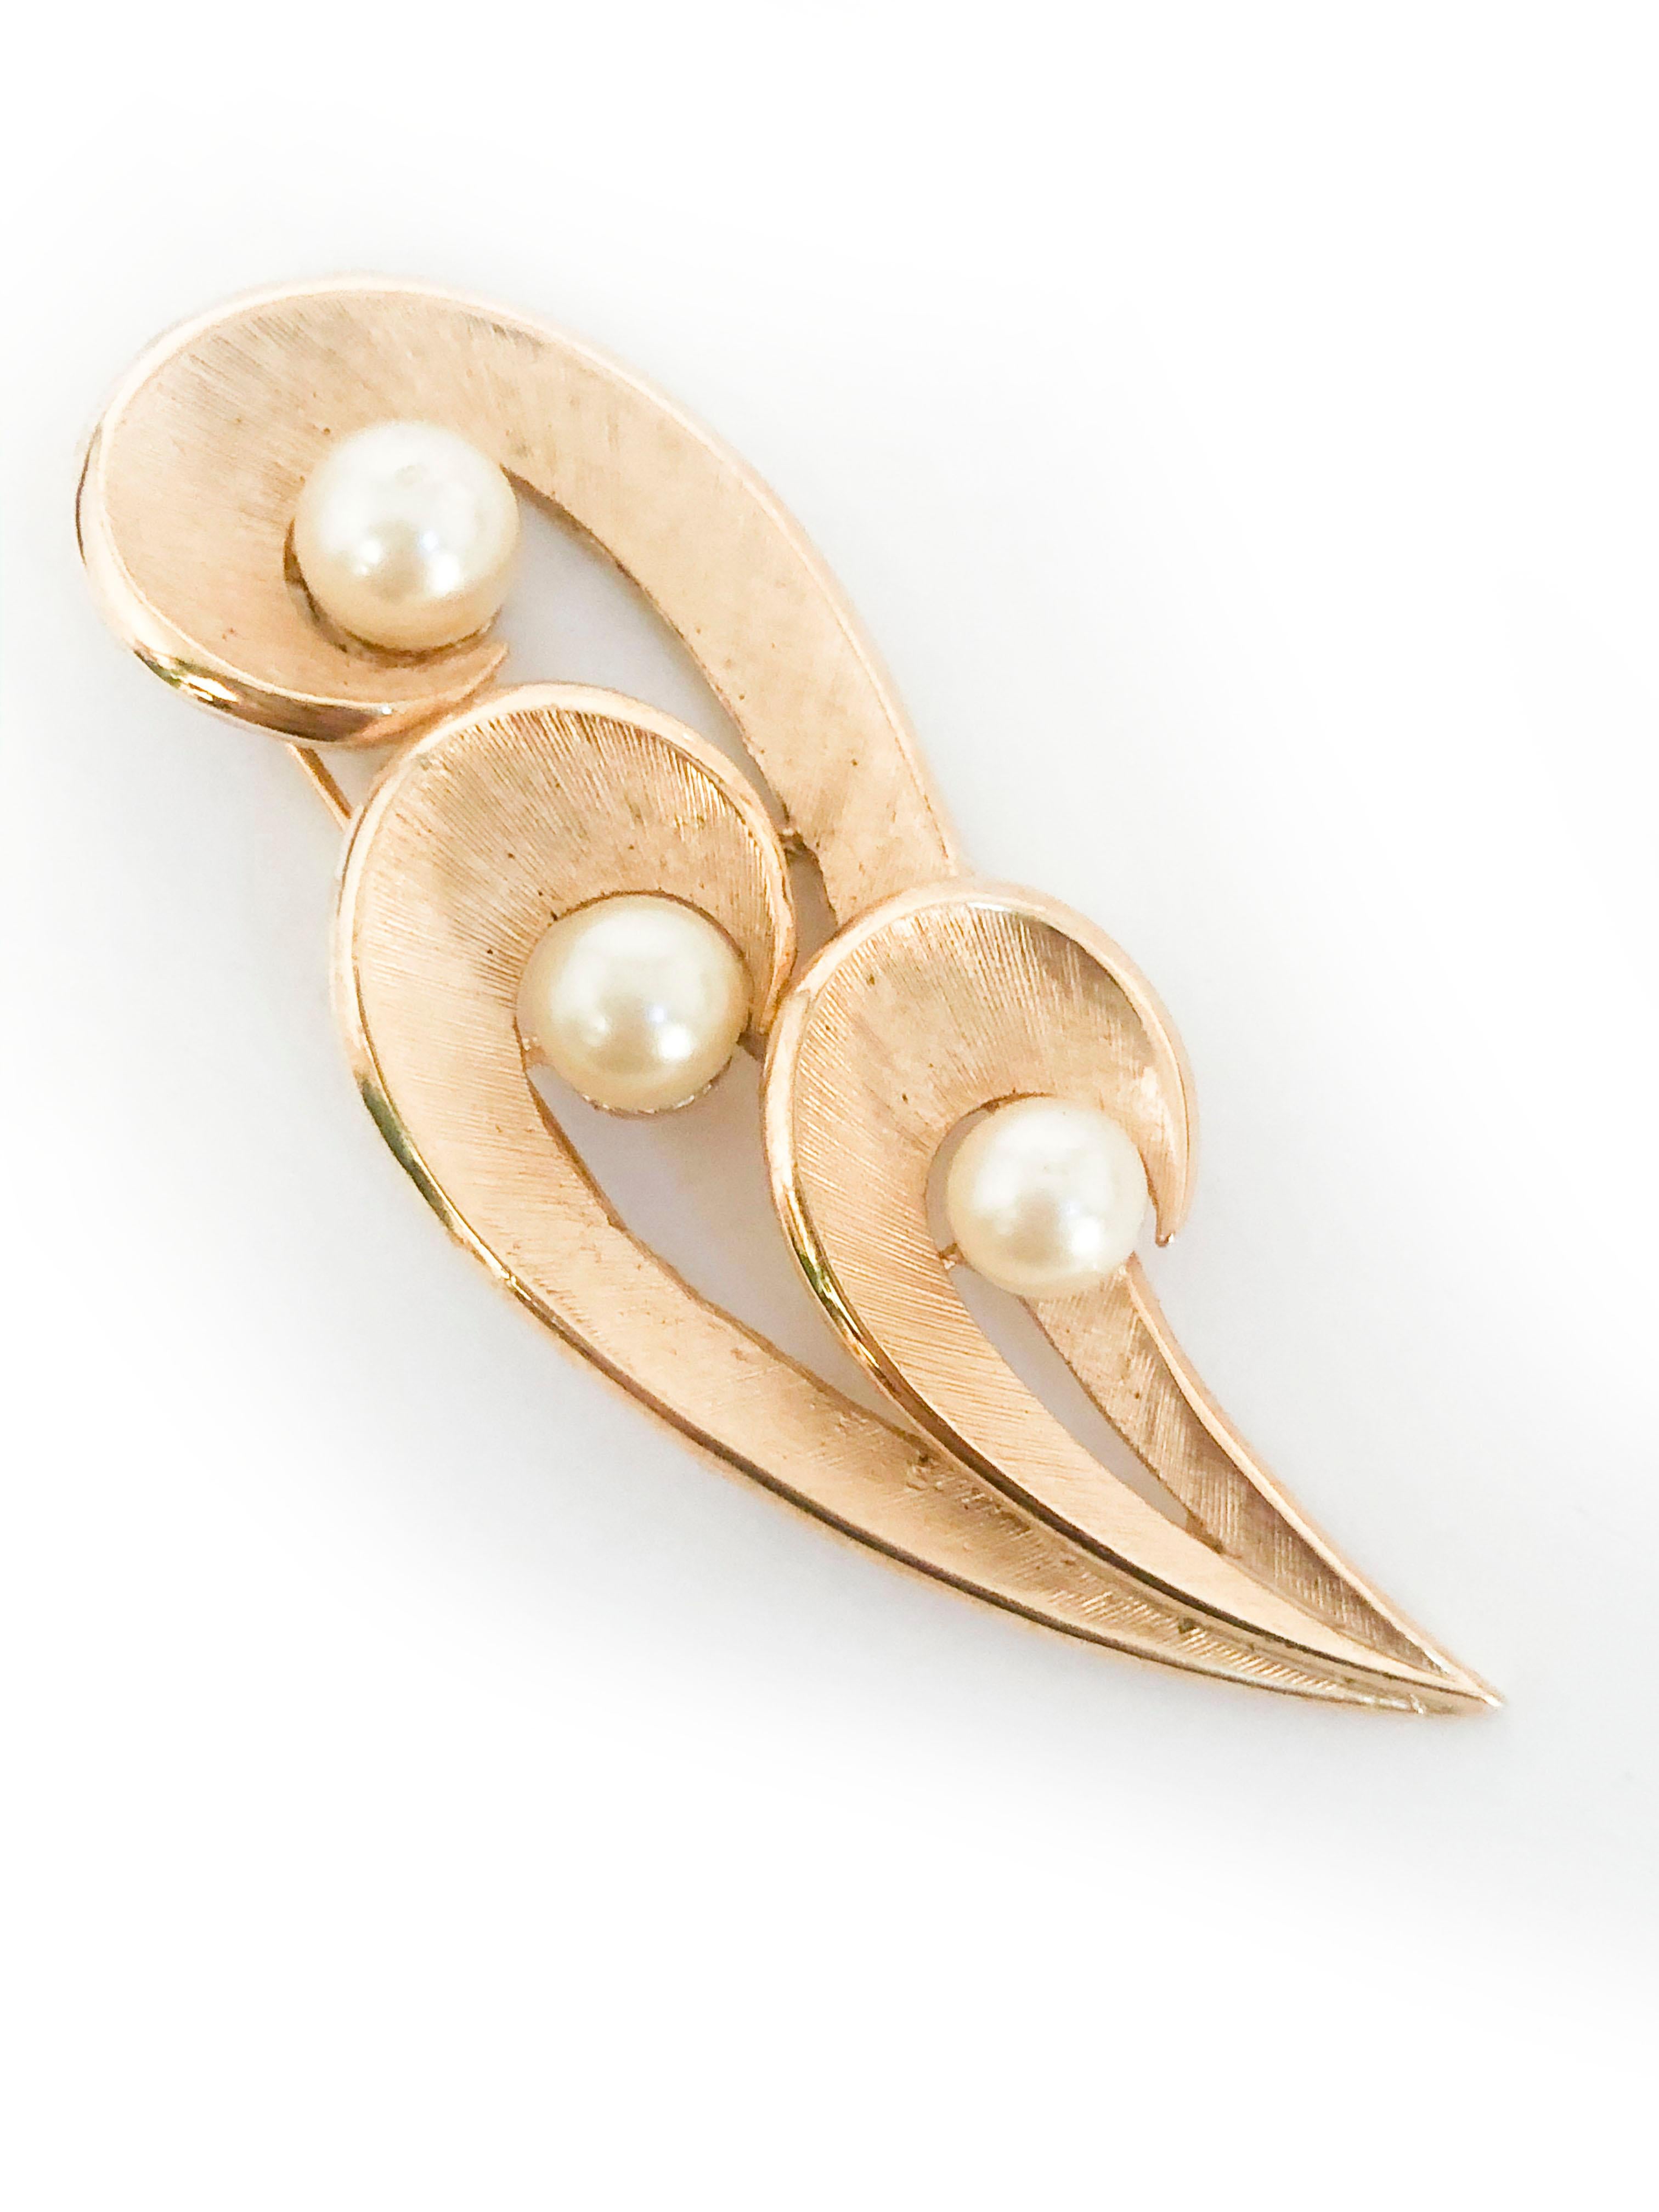 1960s Trifari brooch featuring textured and finished brass curve-like shapes centered with three glass pearls. The back has a standard brooch pin and hallmarked with 